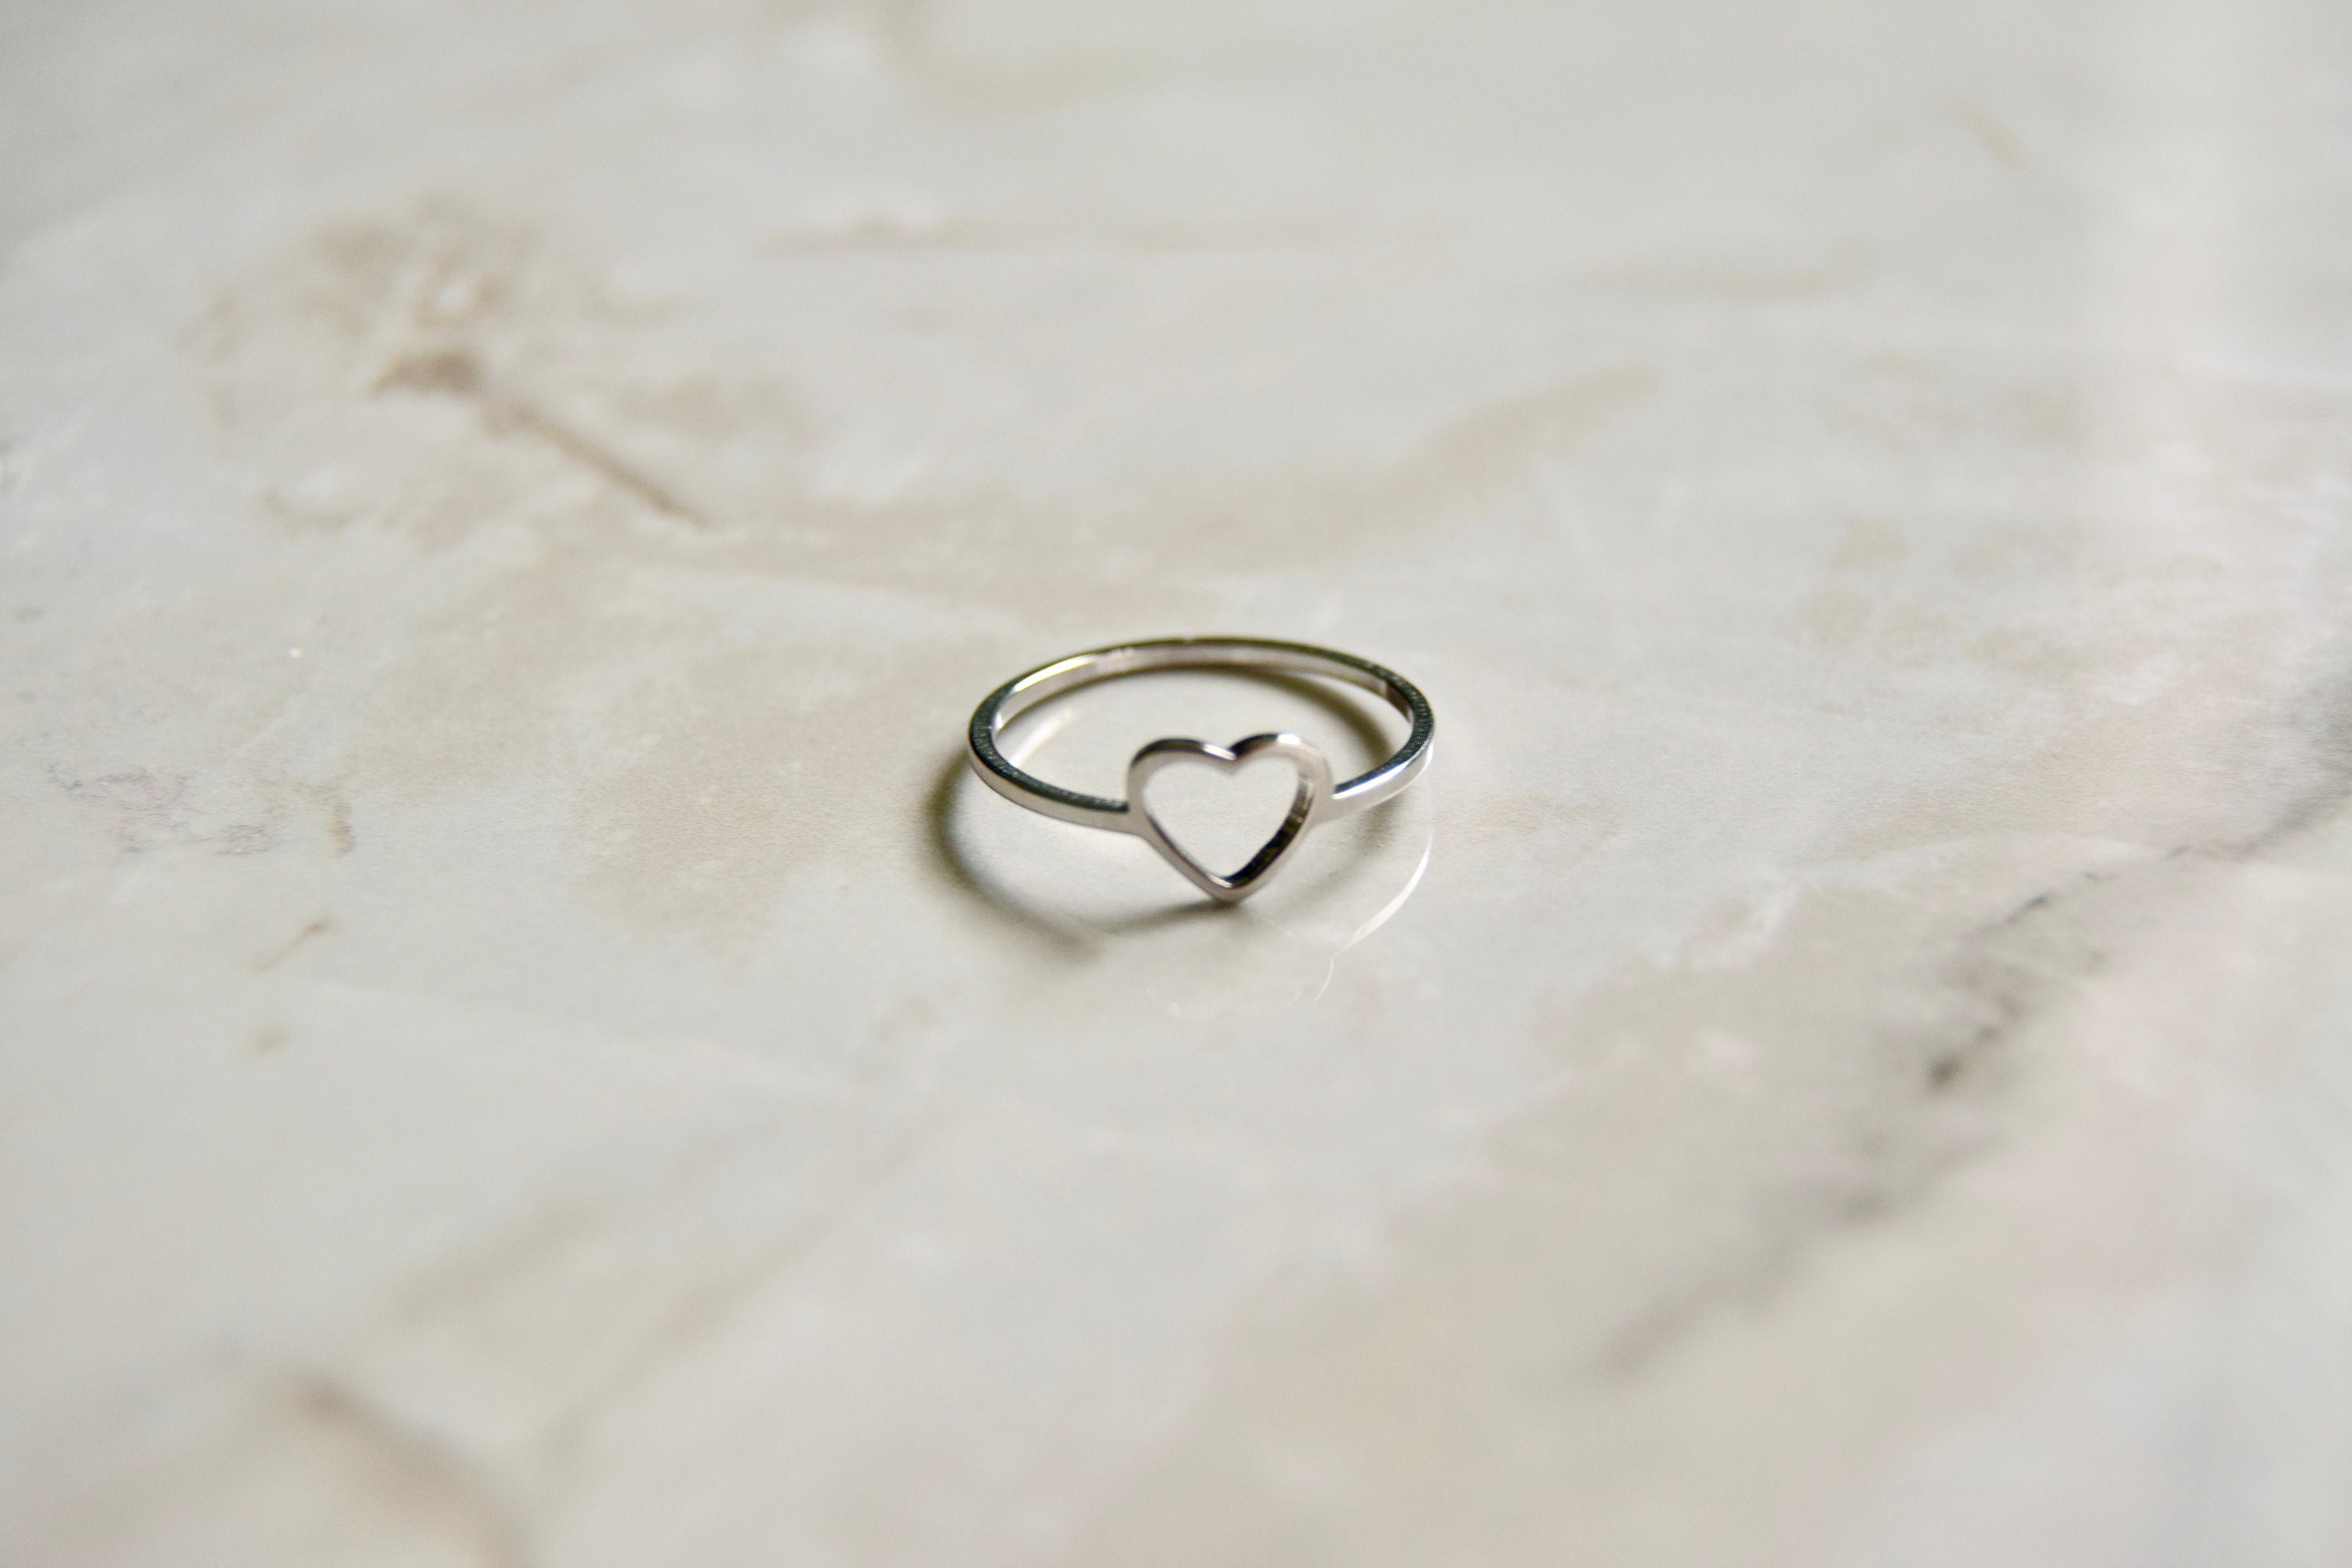 Dainty Heart ring Silver Gold heart ring delicate ring | Etsy